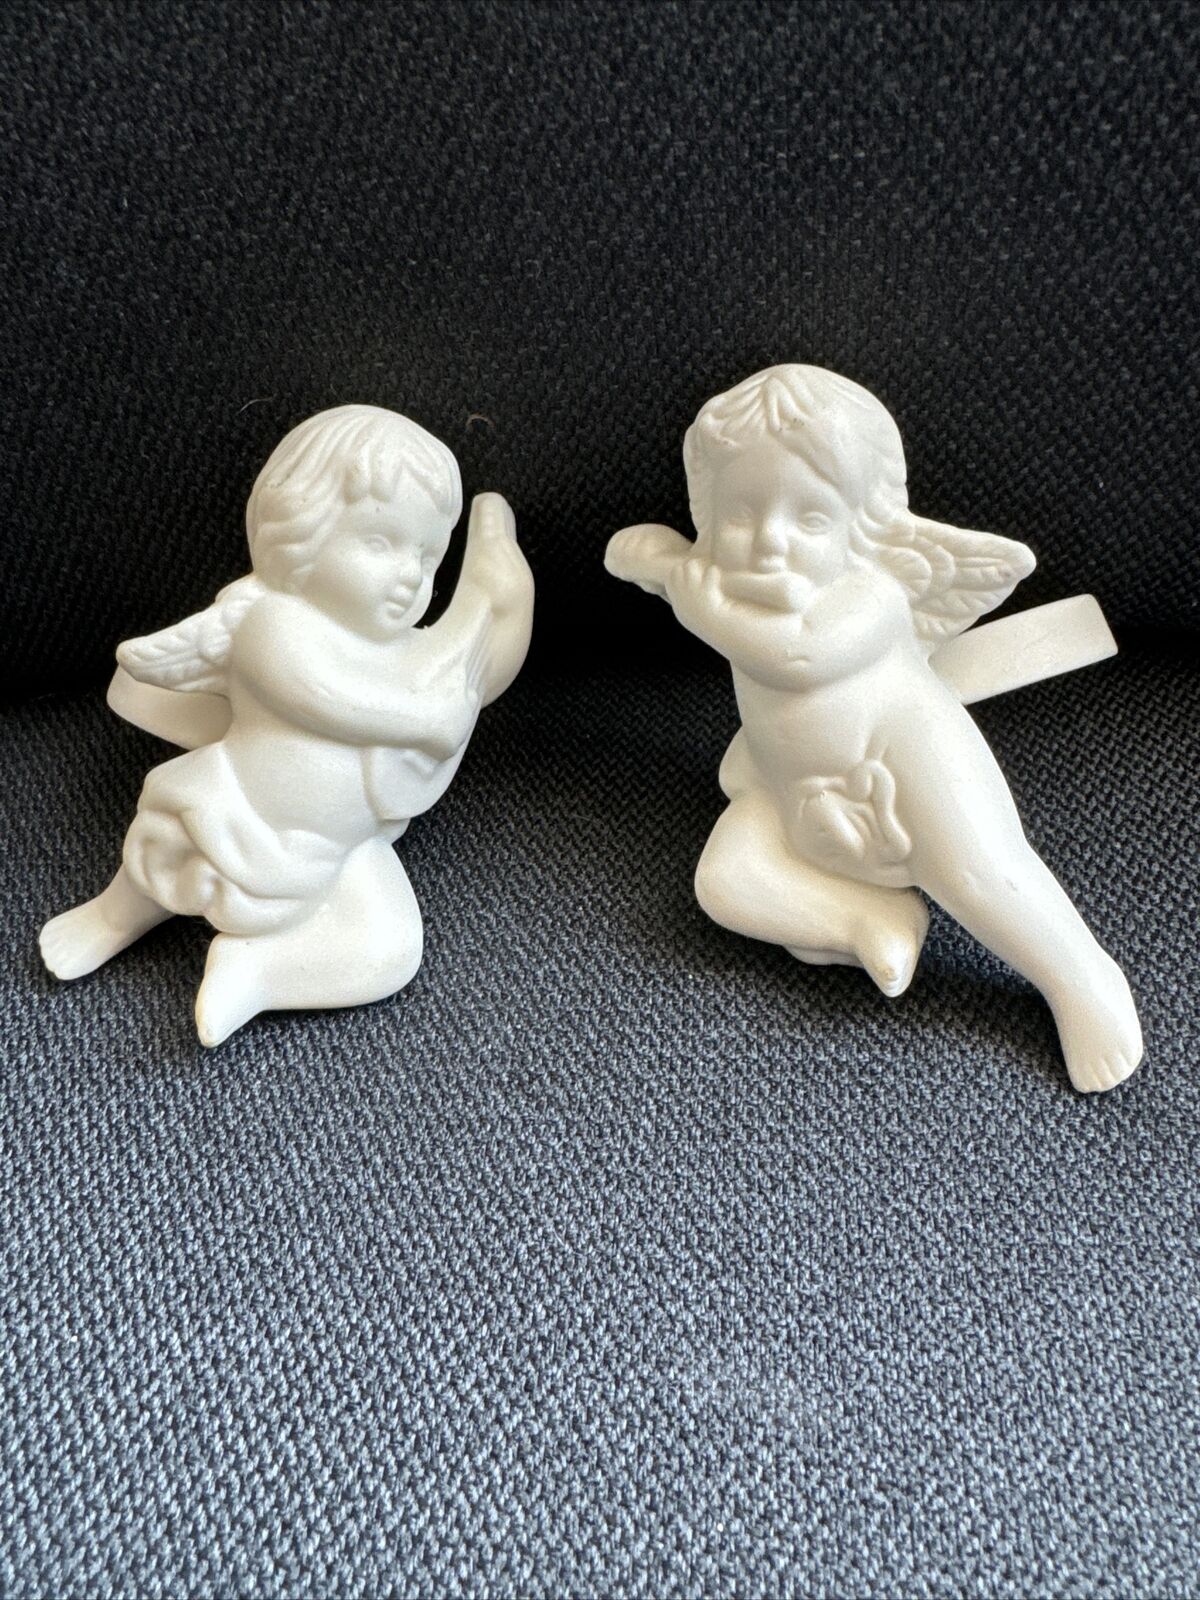 Vintage PartyLite CHERUB Taper Candle Huggers P0190 Retired No Box -Discontinued